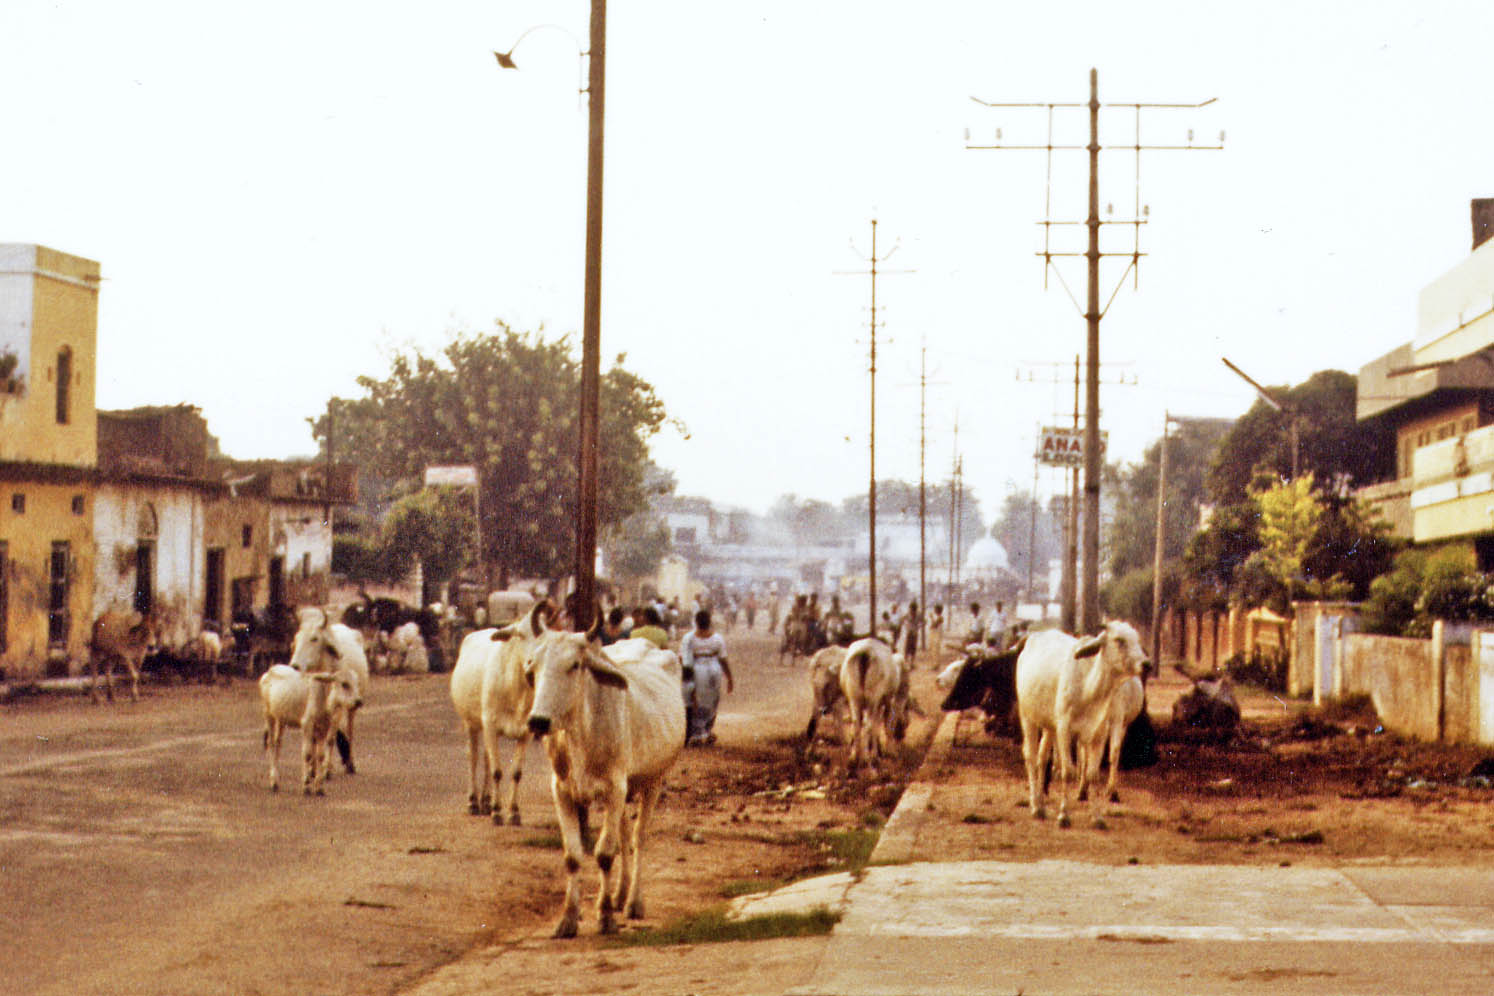 Agra, cows in the street